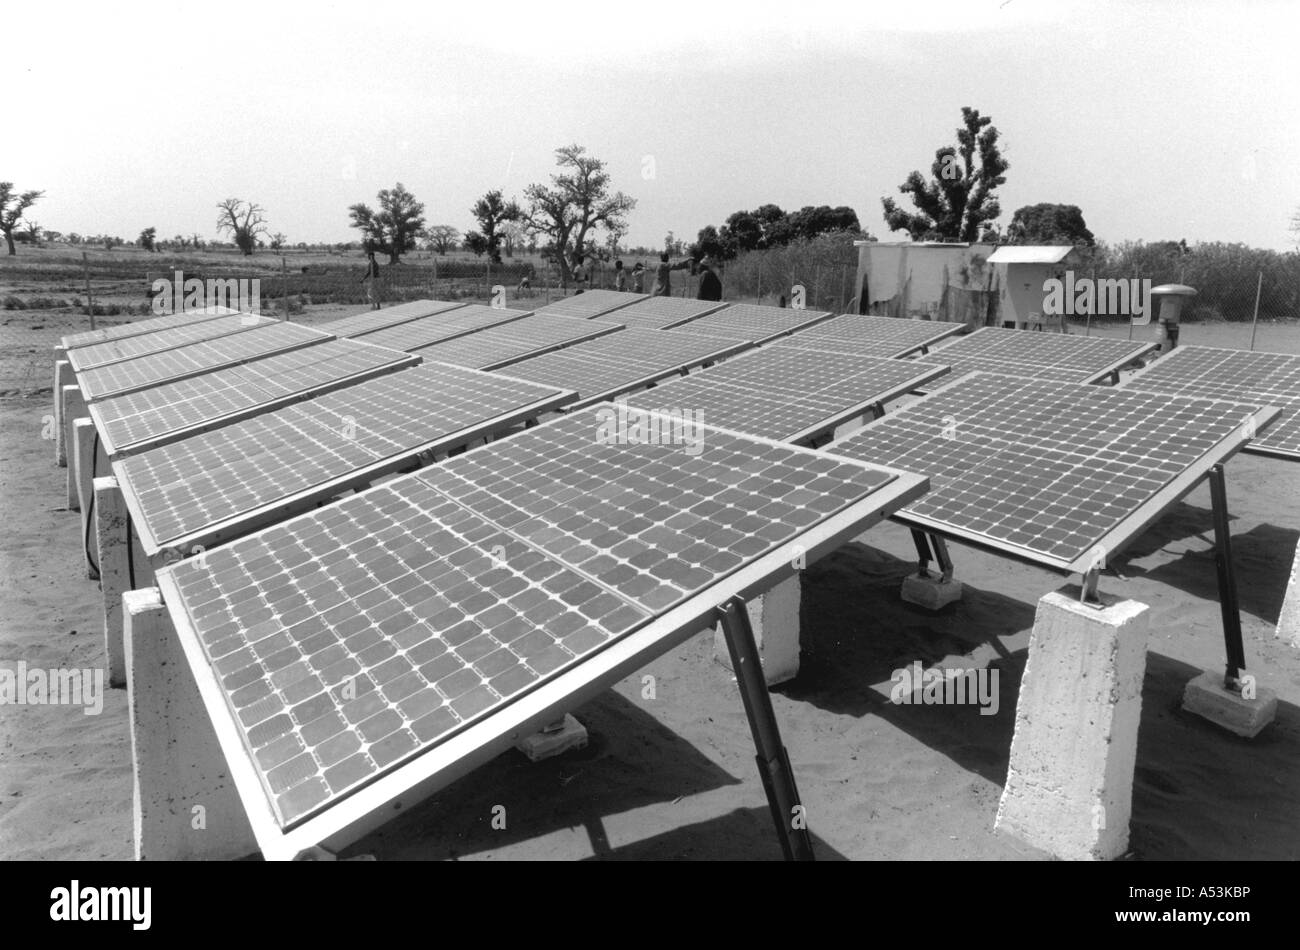 Painet ha1241 017 black and white technology solar electric panels used for pumping water thies senegal country developing Stock Photo